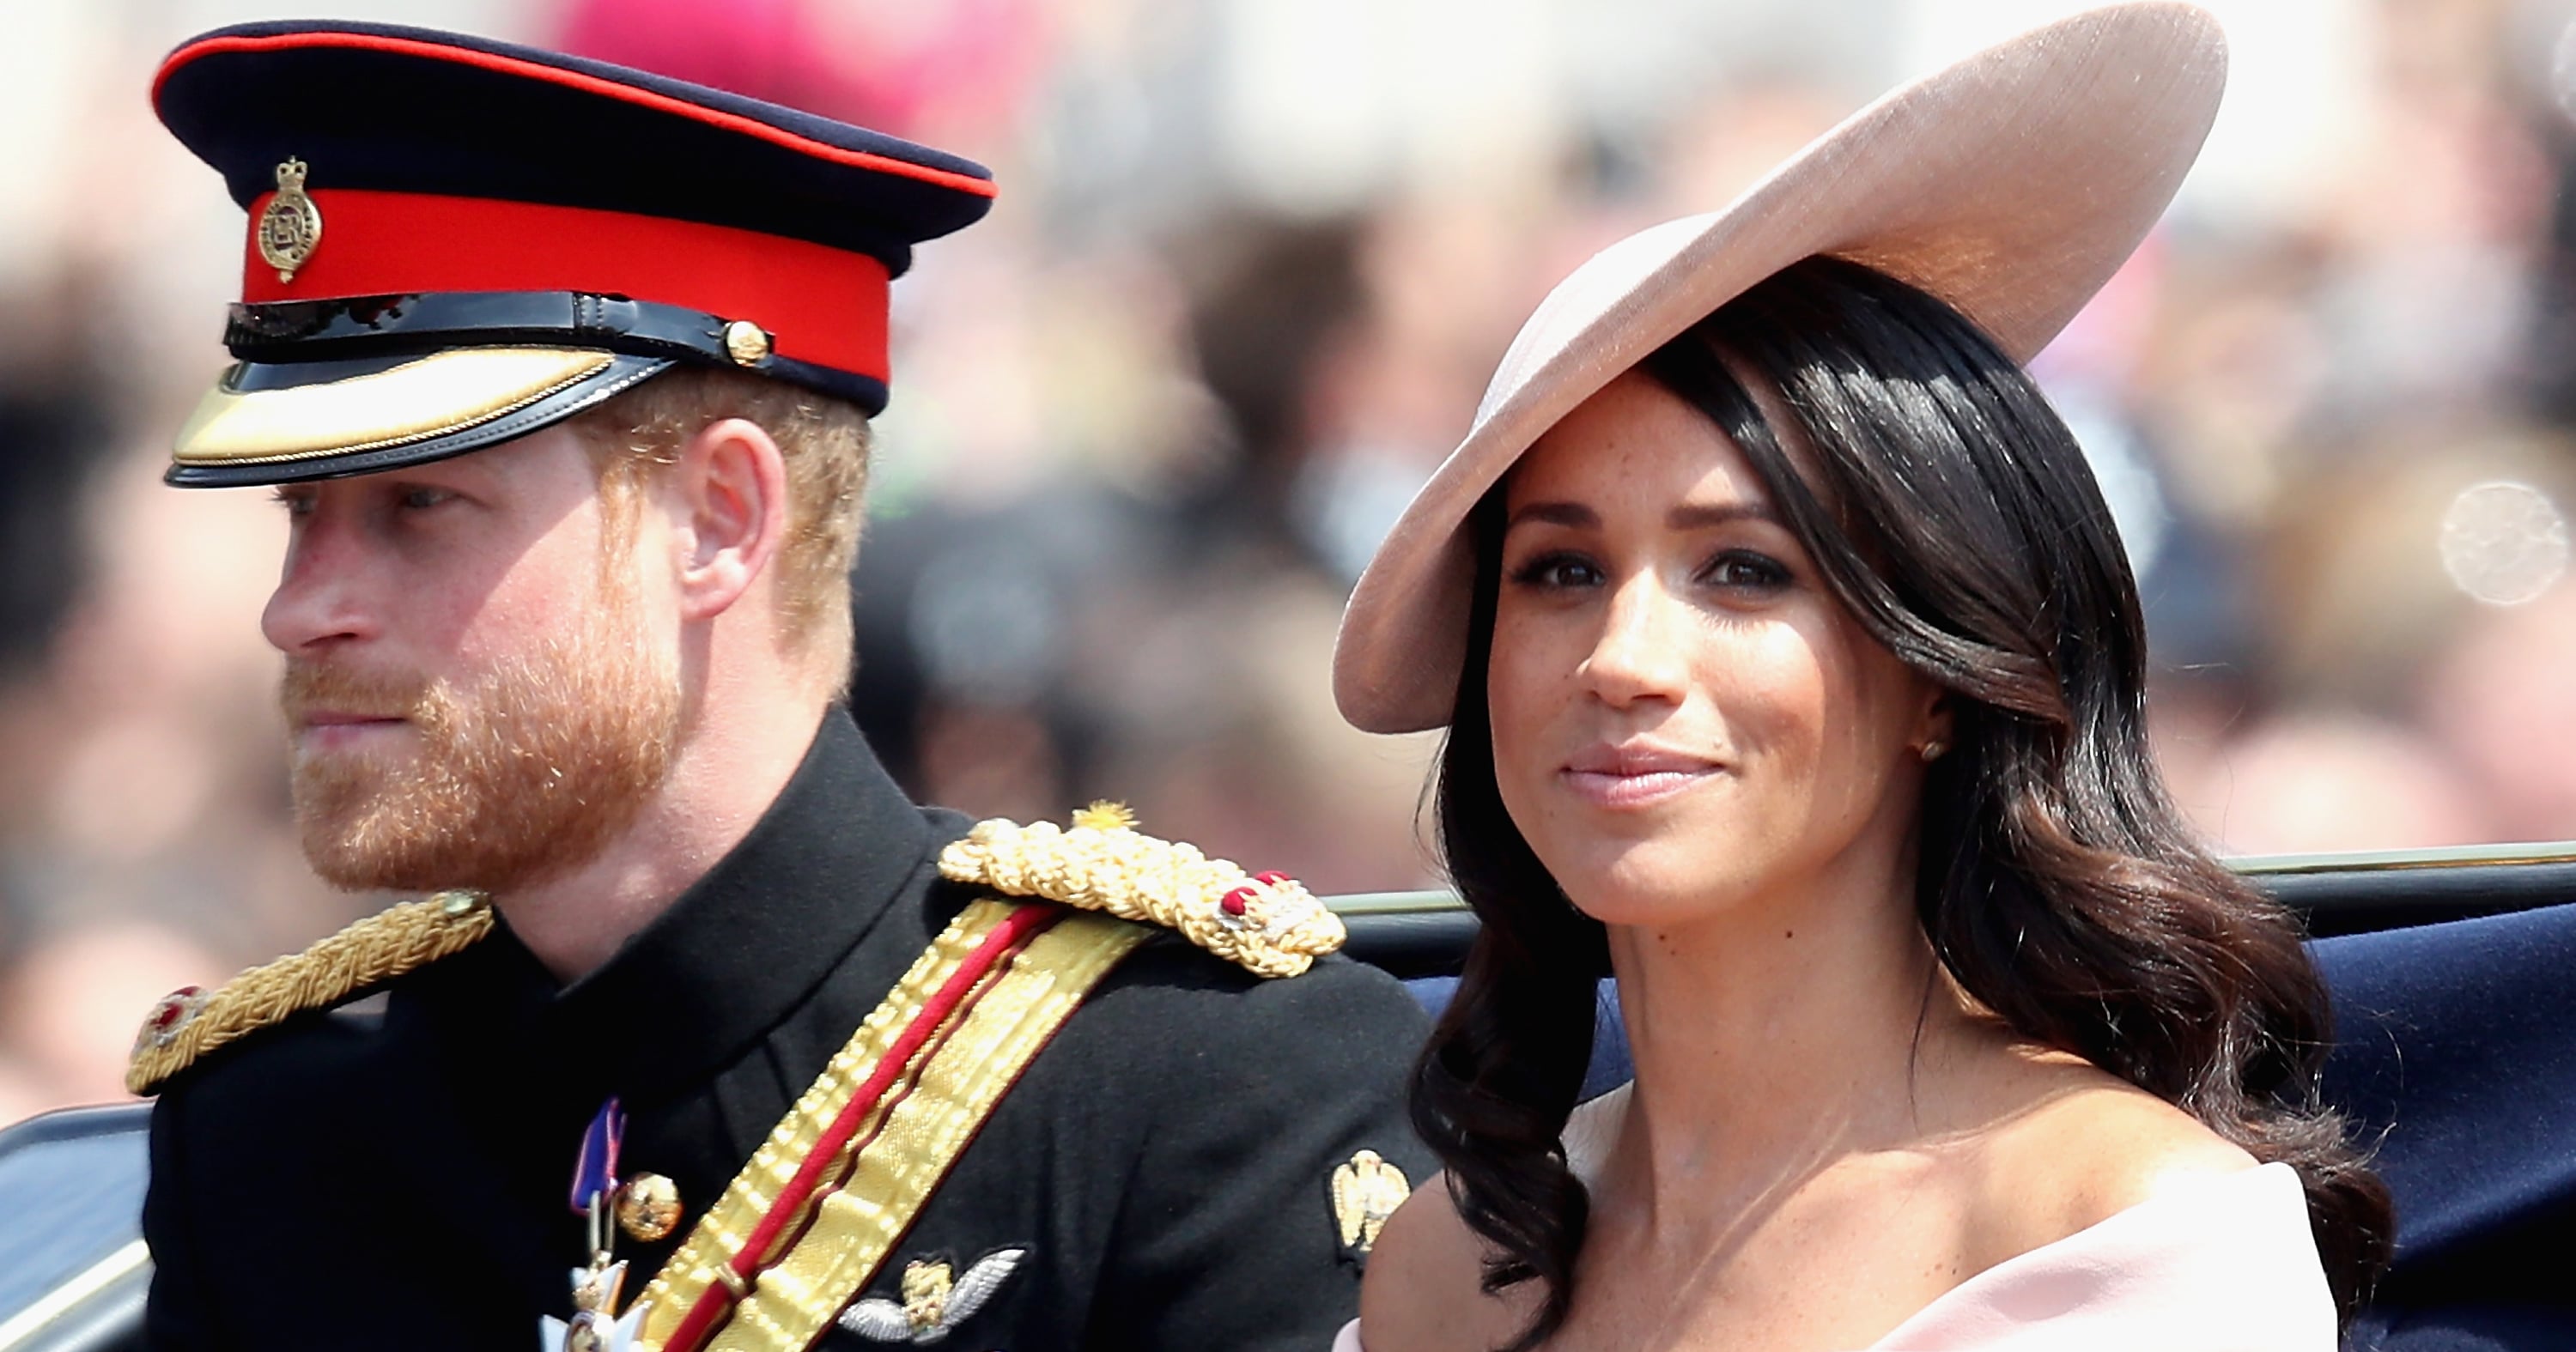 The Royal Family Has Quietly Removed Prince Harry’s HRH Title From Its Website